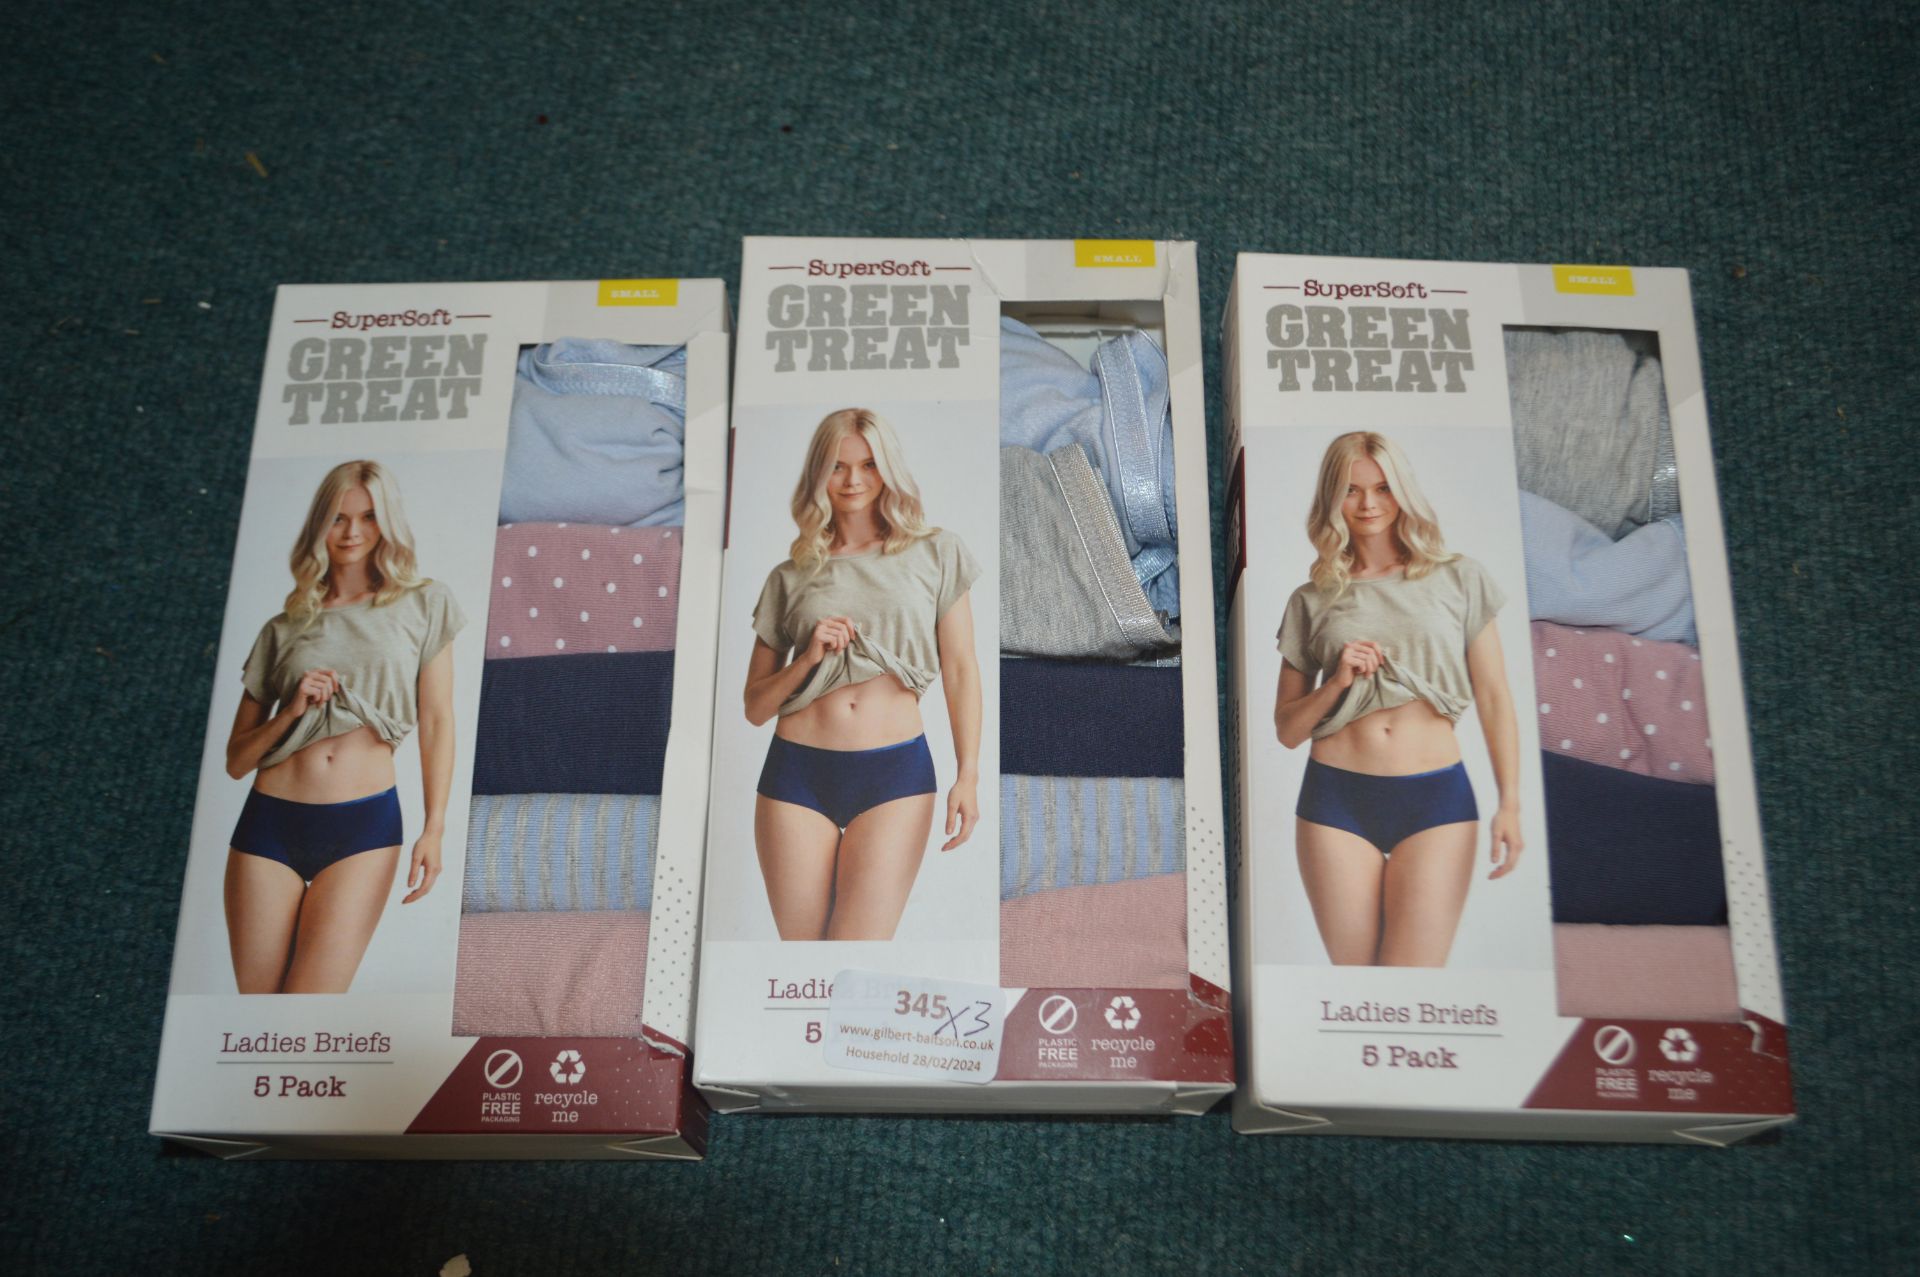 *3x 5pk of Green Treat lady's Briefs Size: S